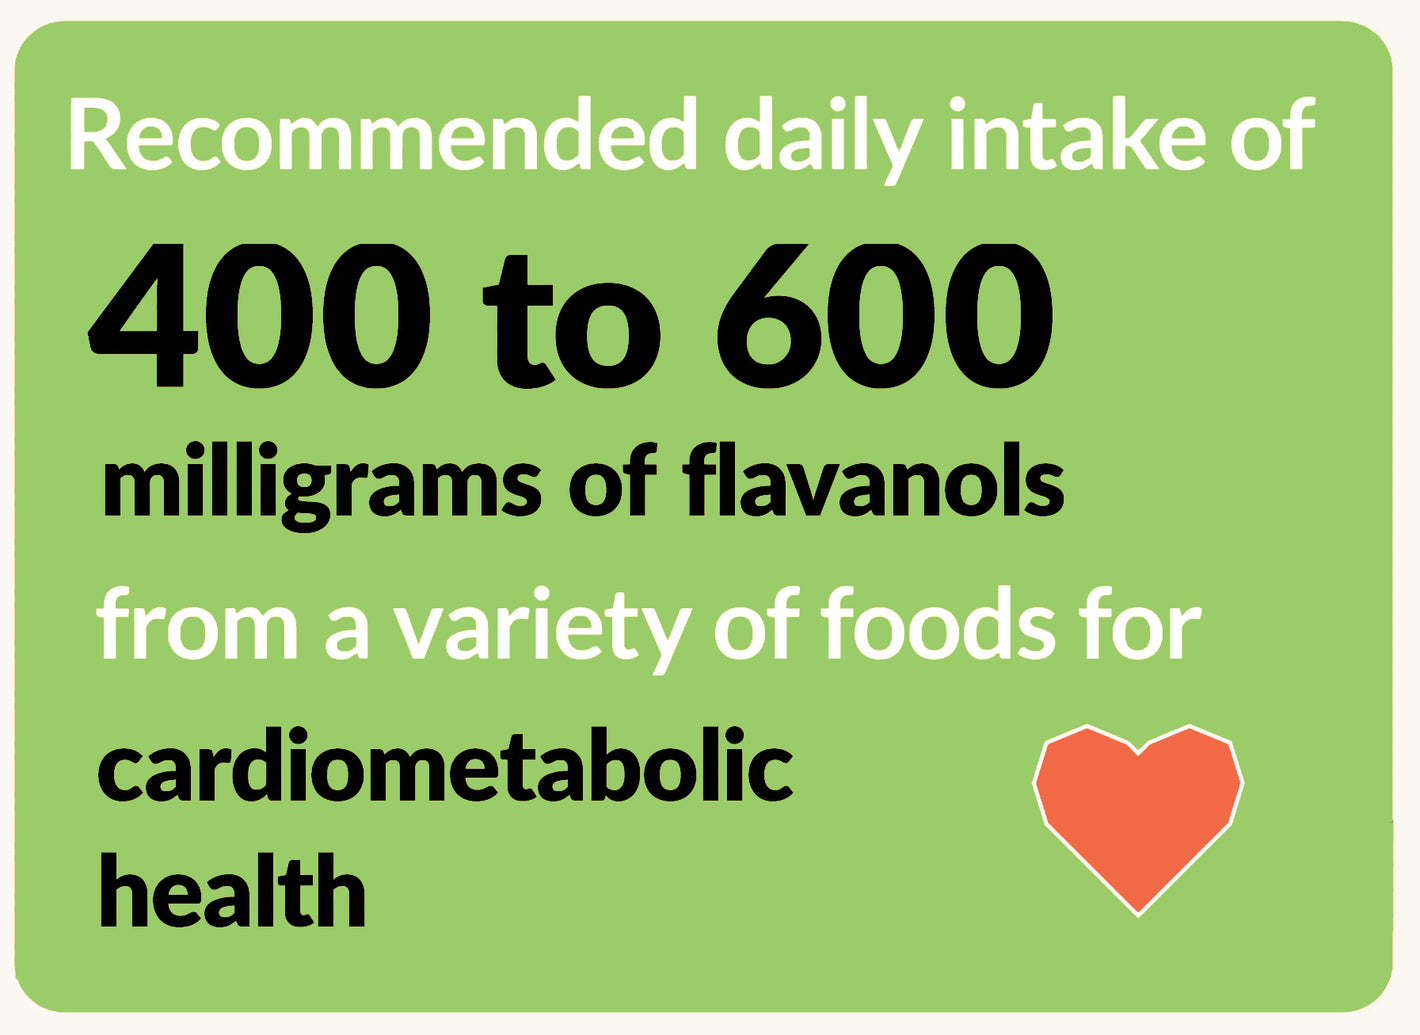 Recommended daily intake of 400 to 600 milligrams of flavanols from a variety of foods for cardiometabolic health